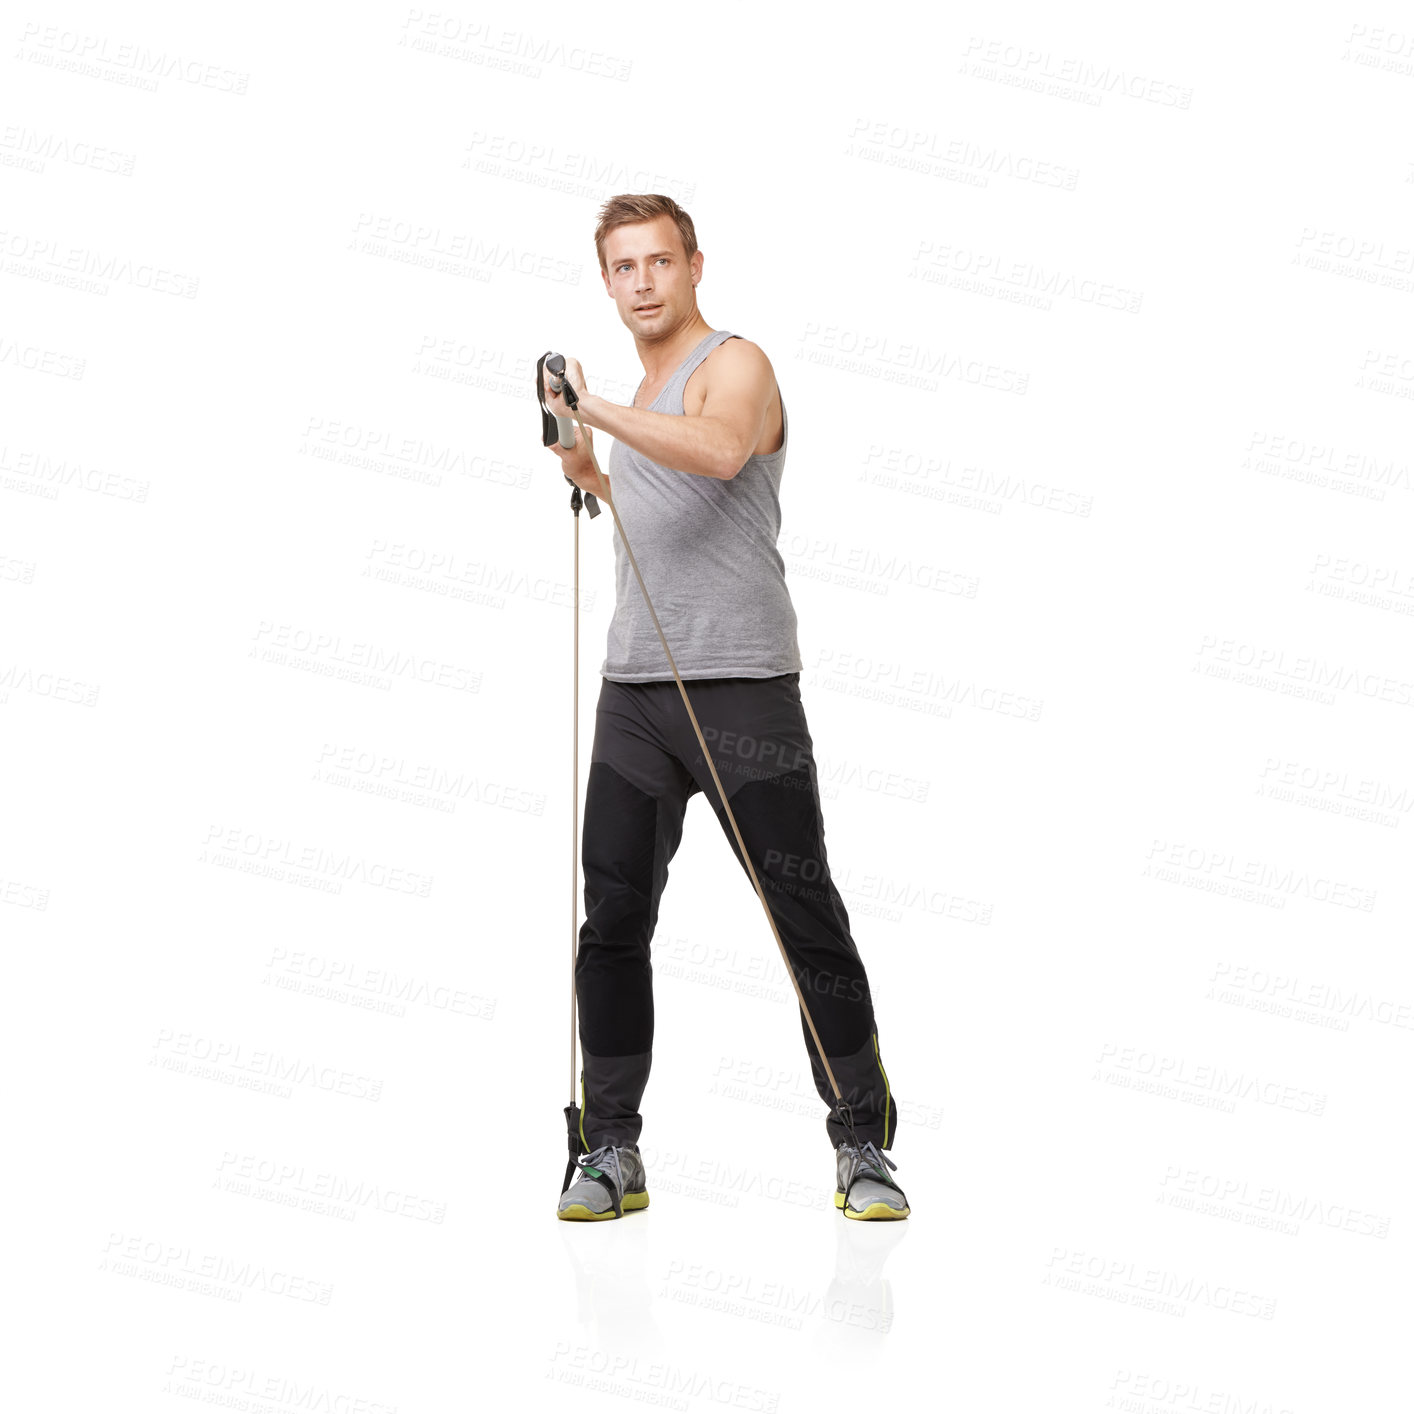 Buy stock photo A young man using a resistance band to tone his body